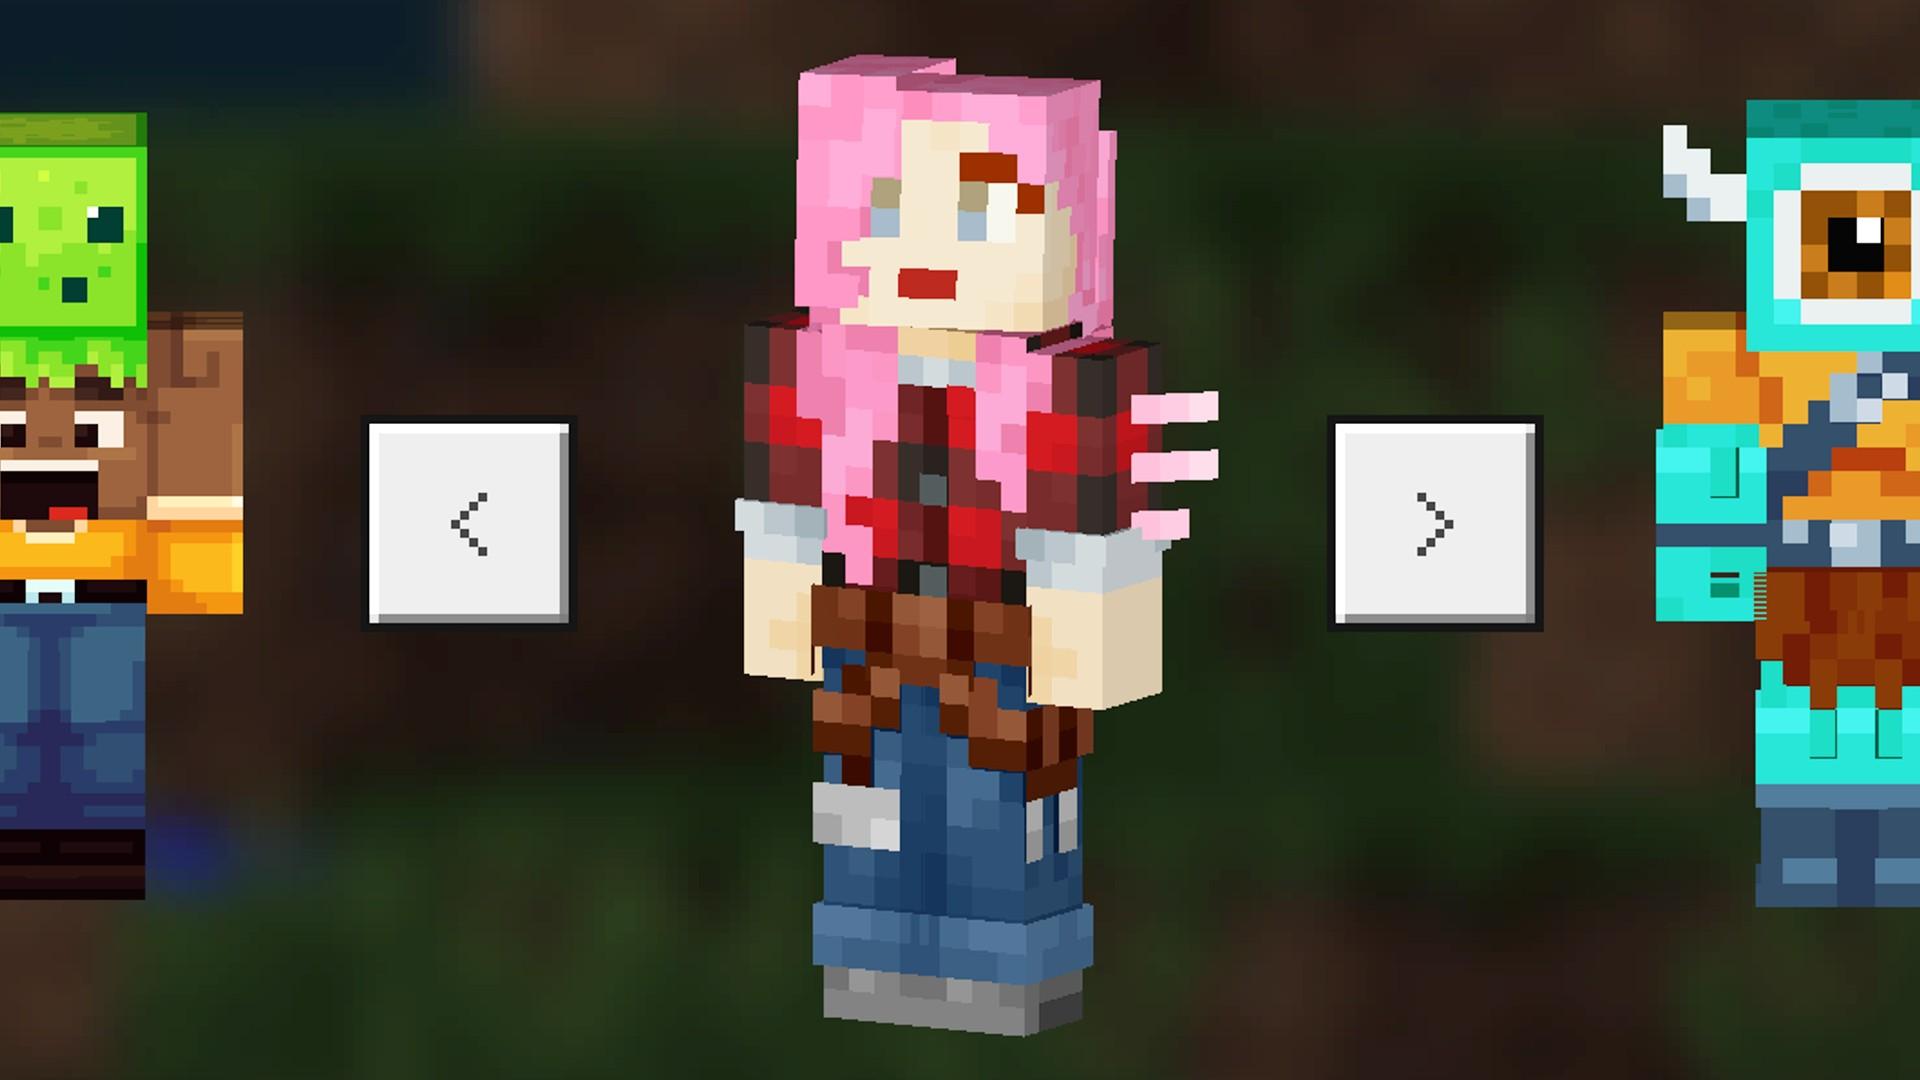 Minecraft's New and Old Default Skins (Complete Guide)